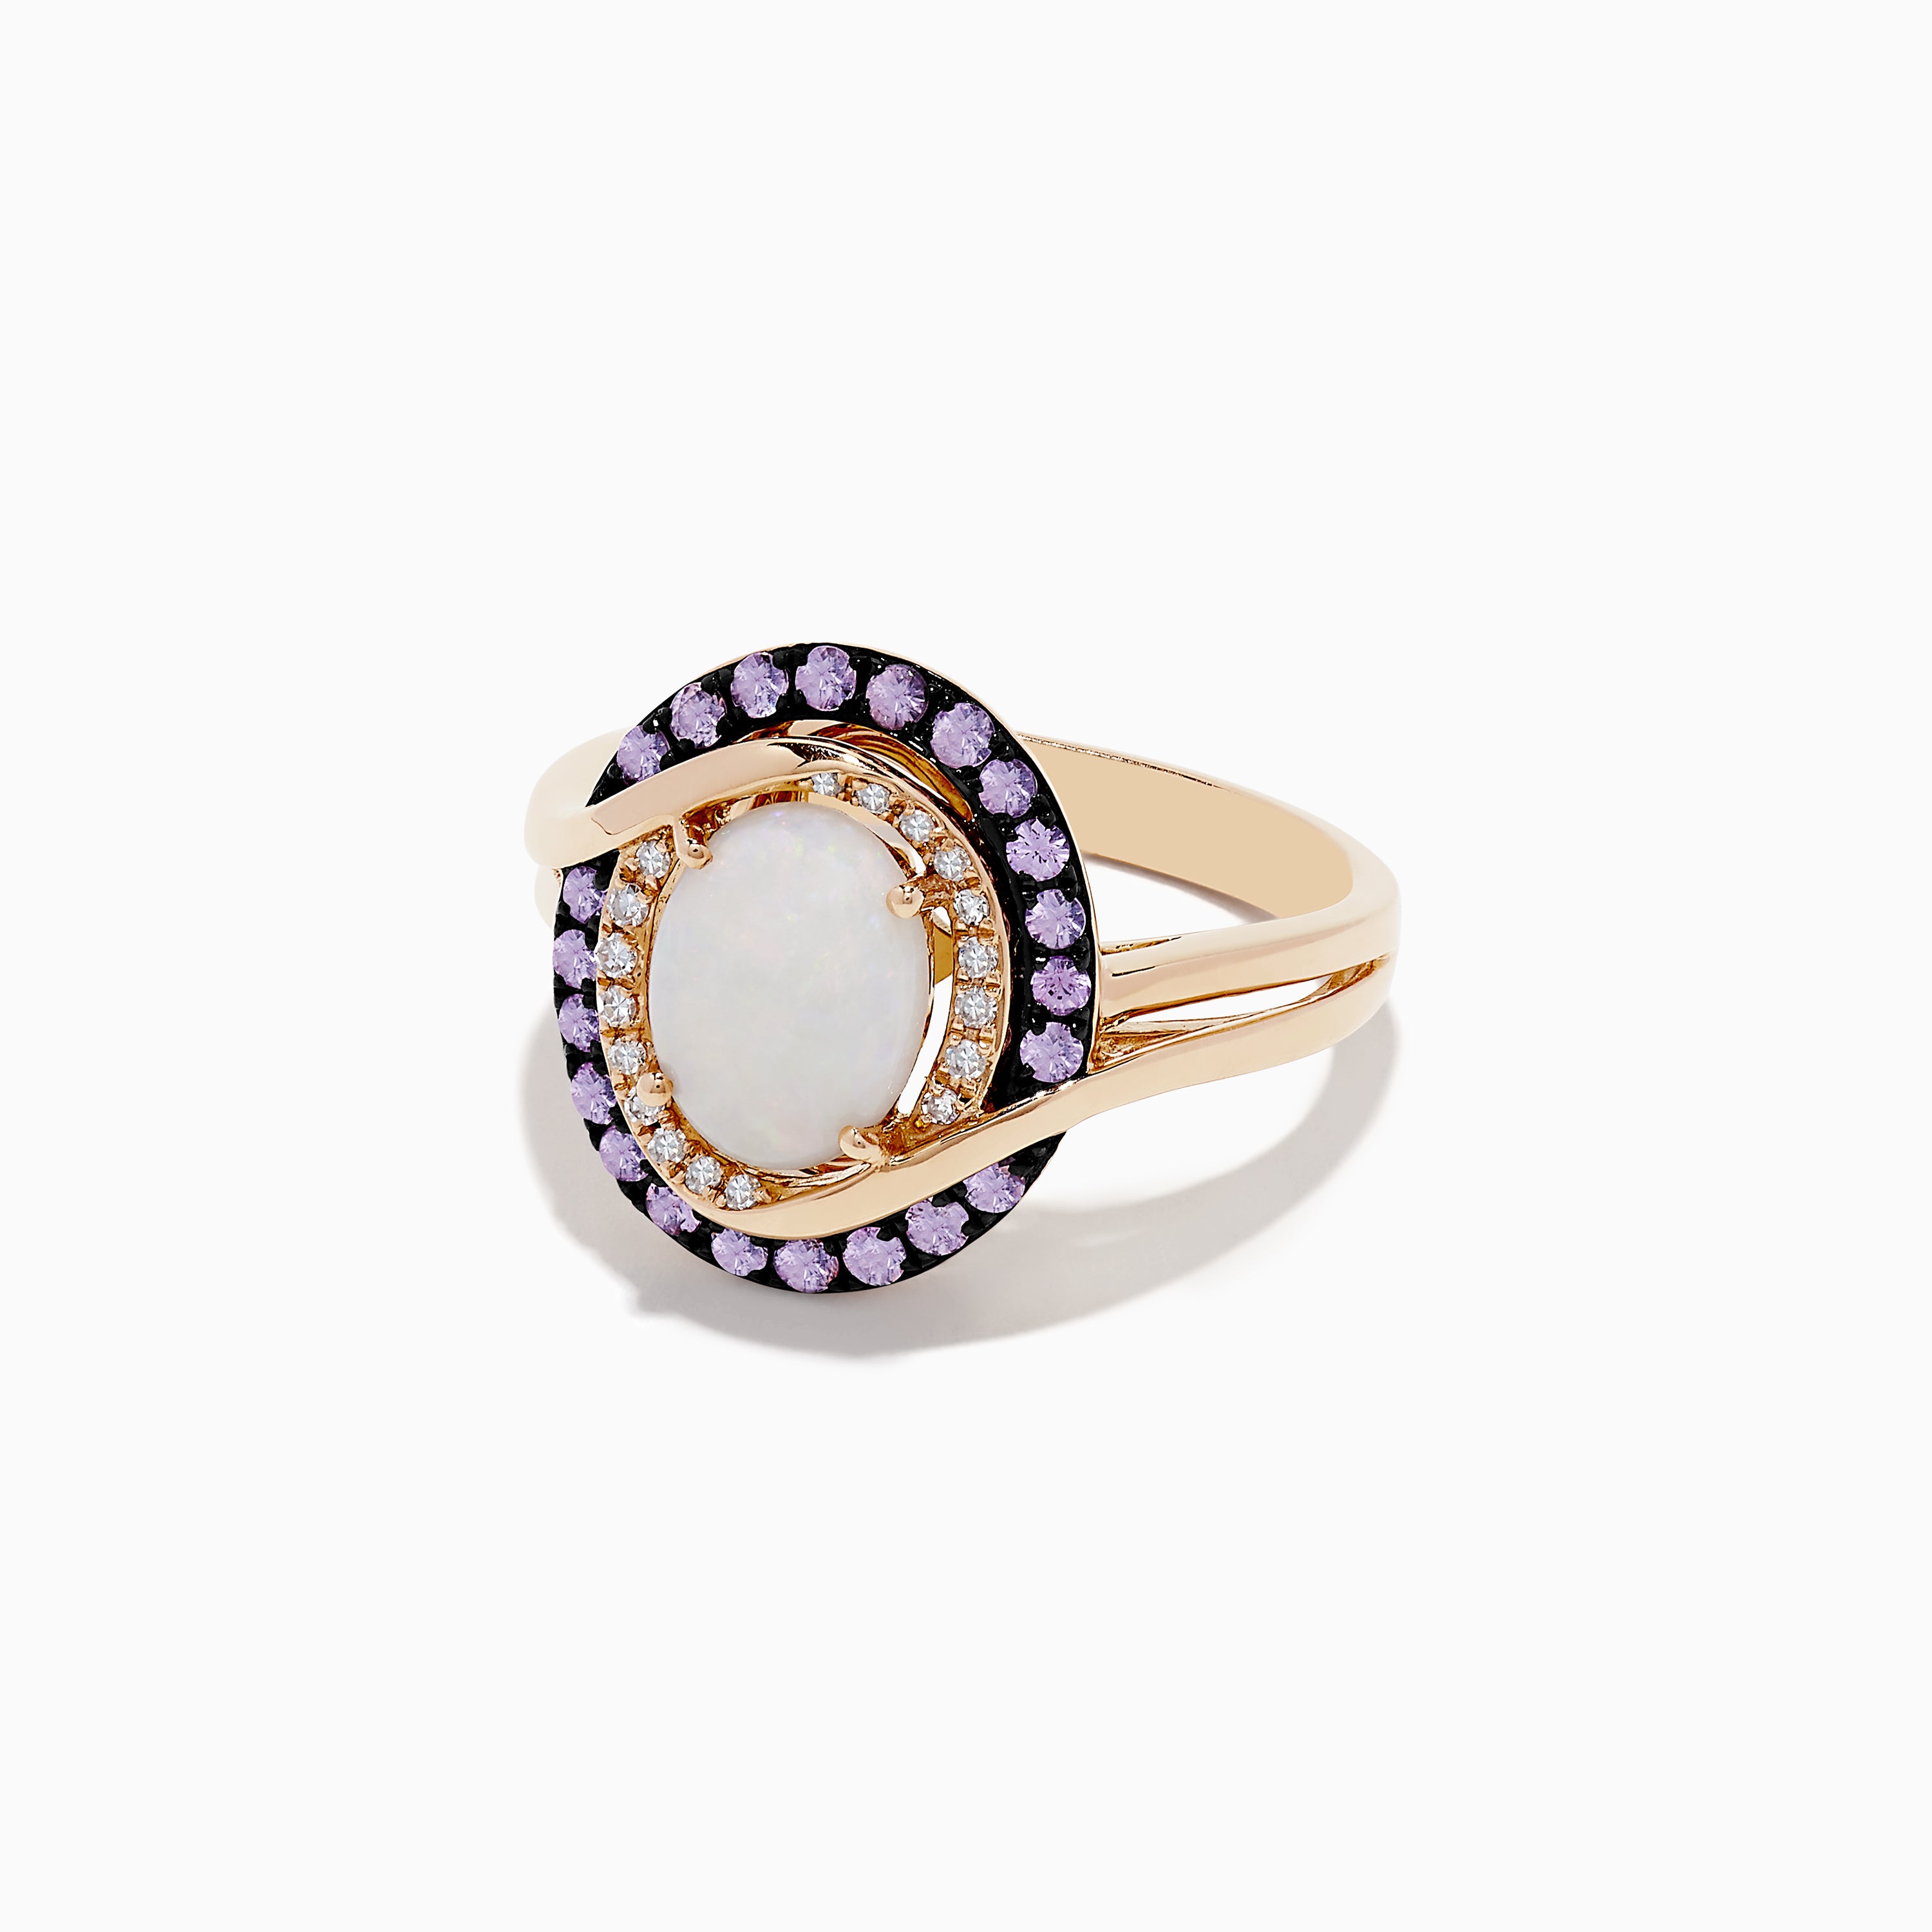 Effy 14K Rose Gold Opal, Pink Sapphire and Diamond Ring, 1.38 TCW